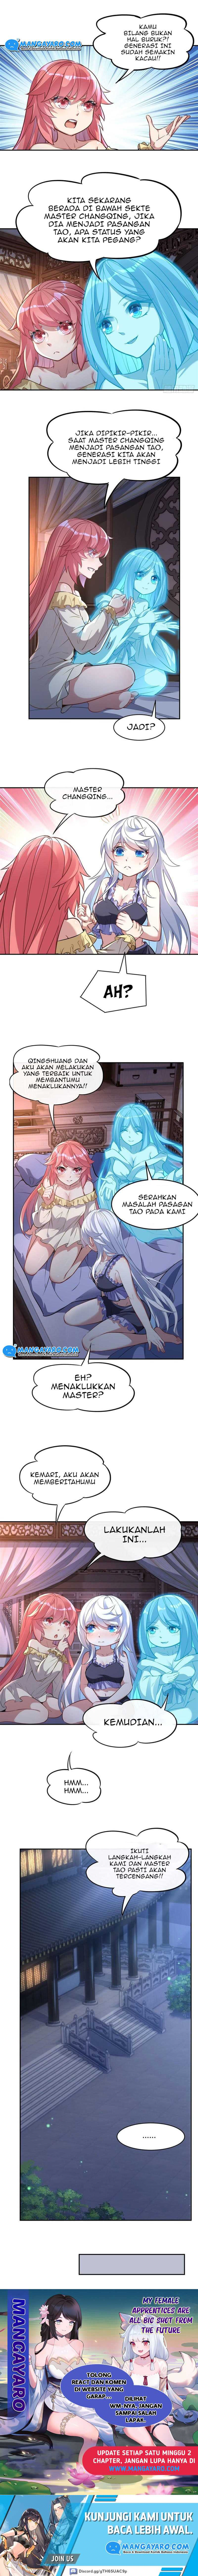 Dilarang COPAS - situs resmi www.mangacanblog.com - Komik my female apprentices are all big shots from the future 071 - chapter 71 72 Indonesia my female apprentices are all big shots from the future 071 - chapter 71 Terbaru 6|Baca Manga Komik Indonesia|Mangacan